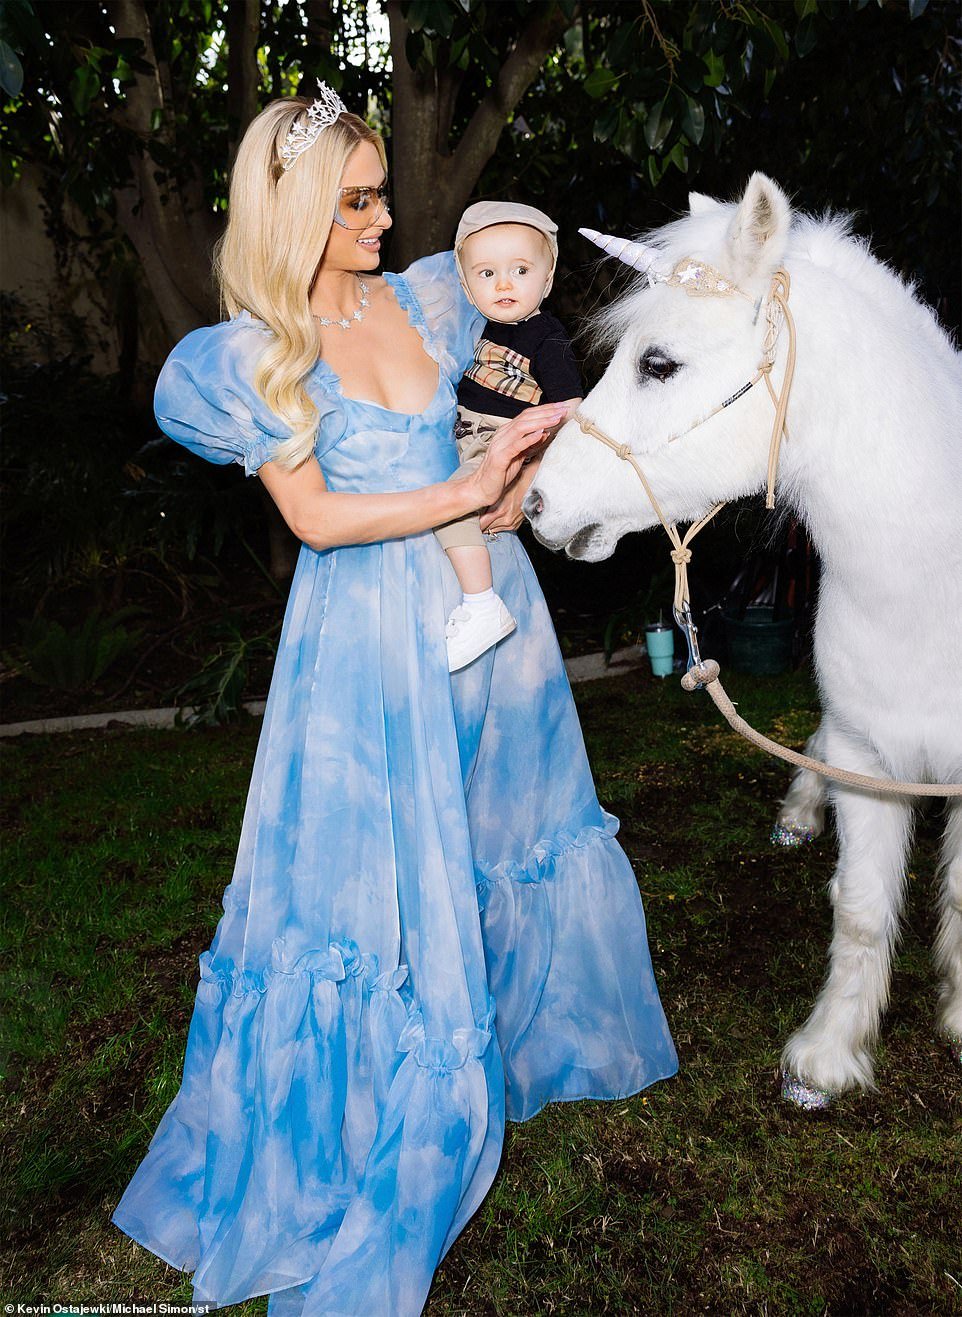 The businesswoman, who is married to Carter Reum, even secured a 'unicorn' to entertain the toddlers and partygoers